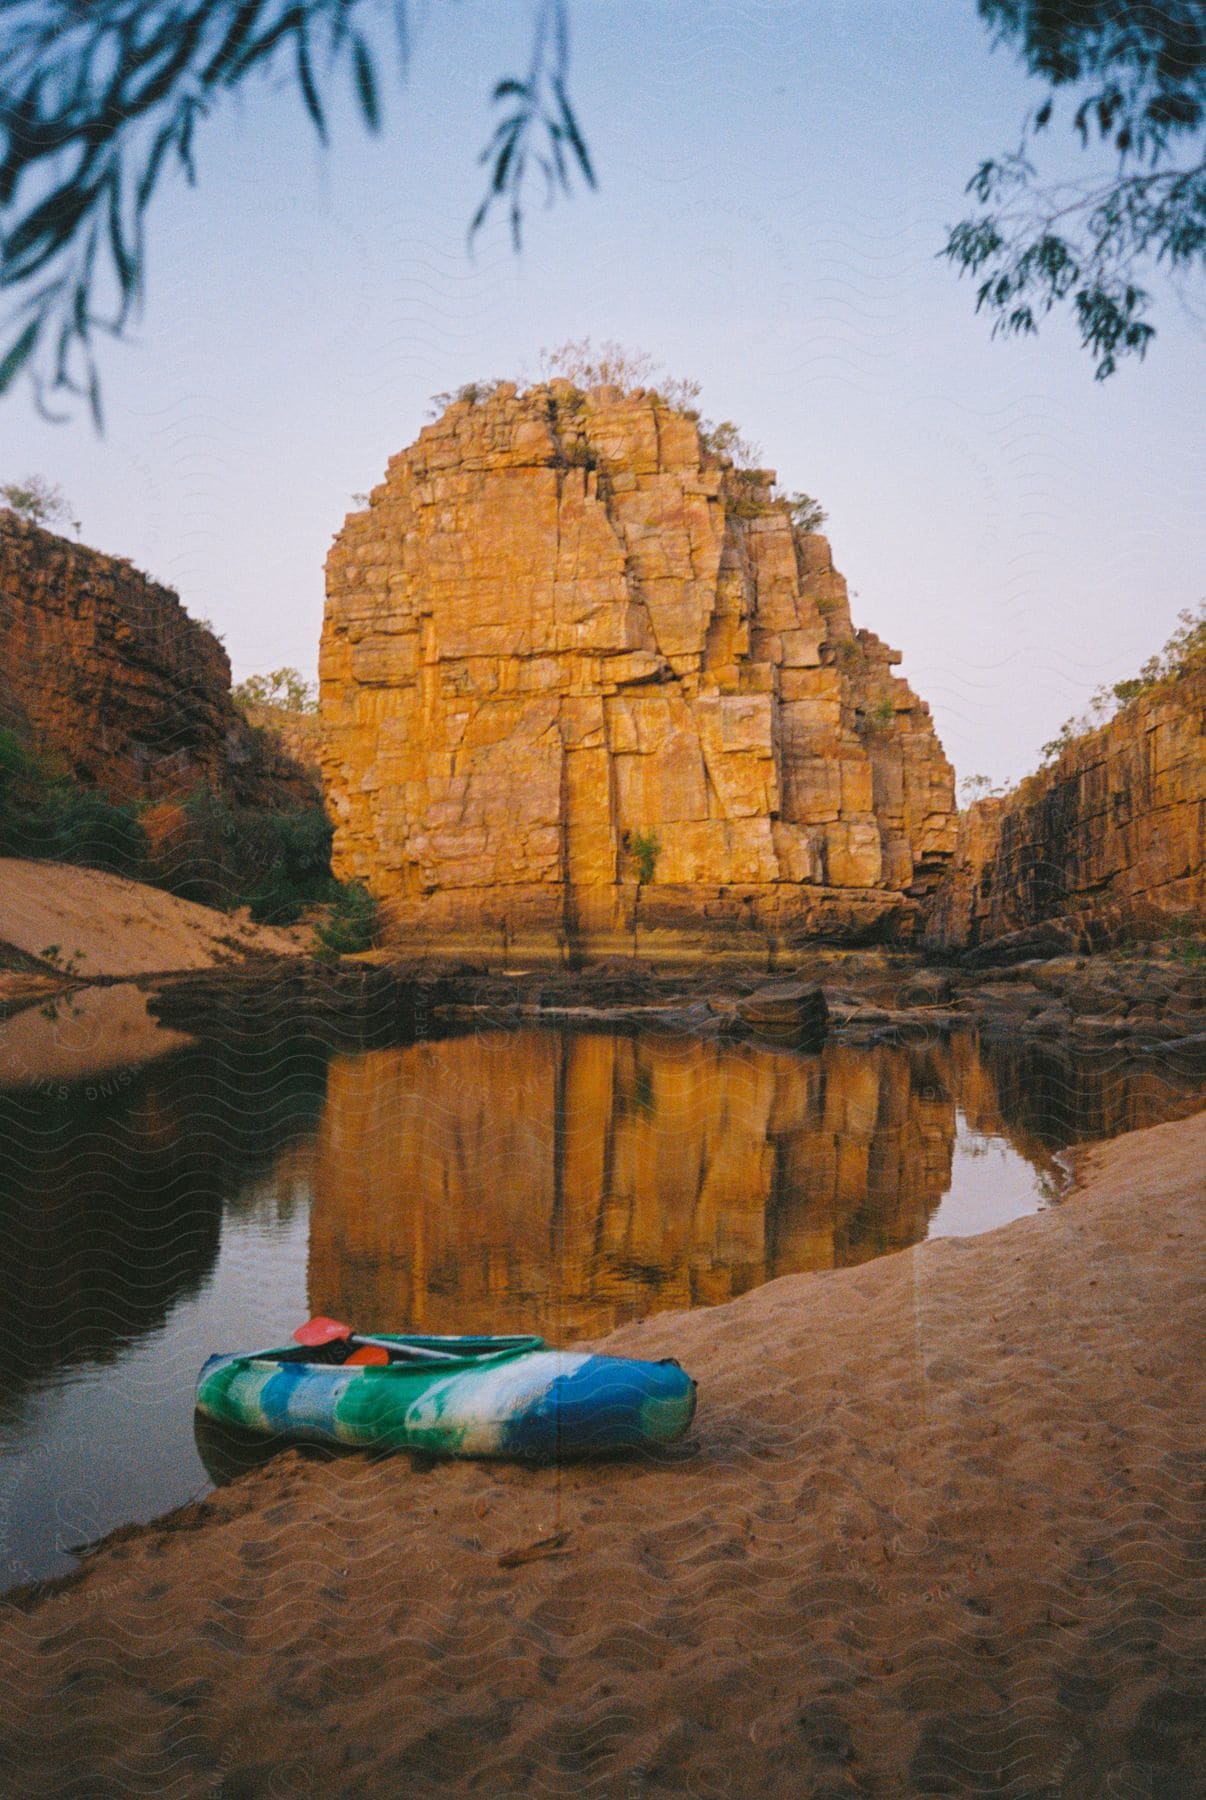 A kayak is on the bank of a river in a canyon